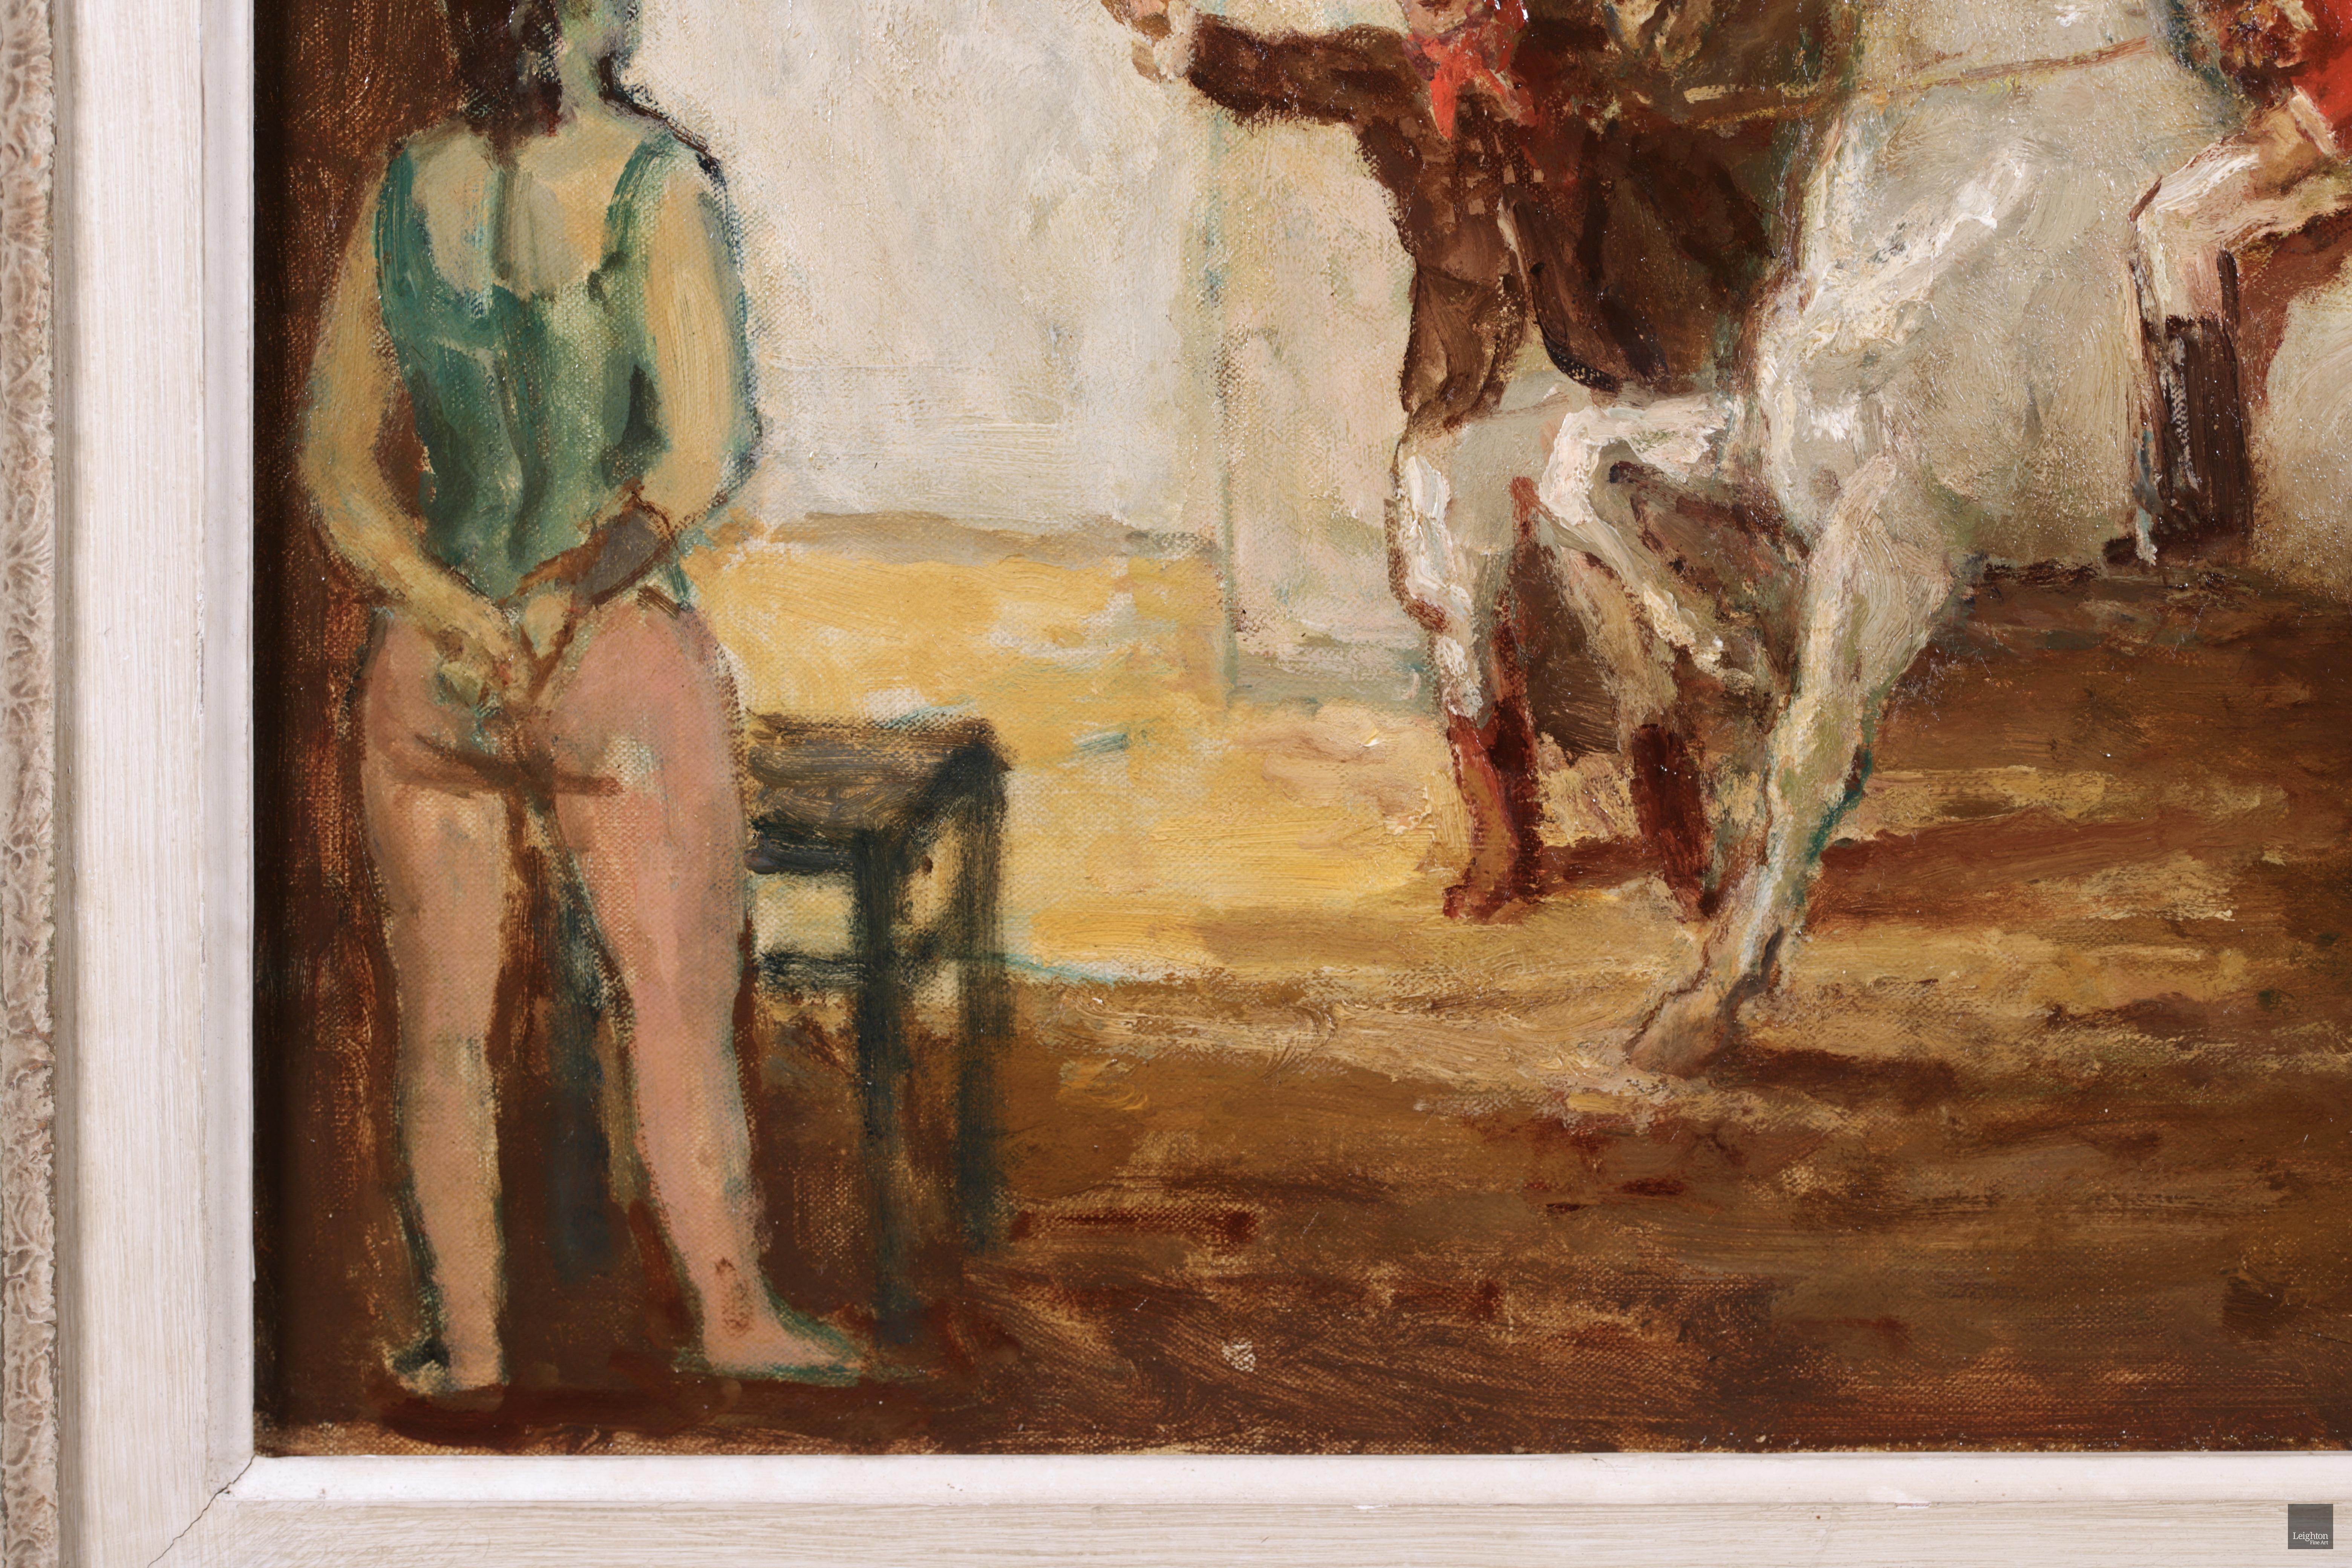 Au Cirque - Post Impressionist Oil, Figures & Horse at Circus by Marcel Cosson - Post-Impressionist Painting by Jean-Louis-Marcel Cosson